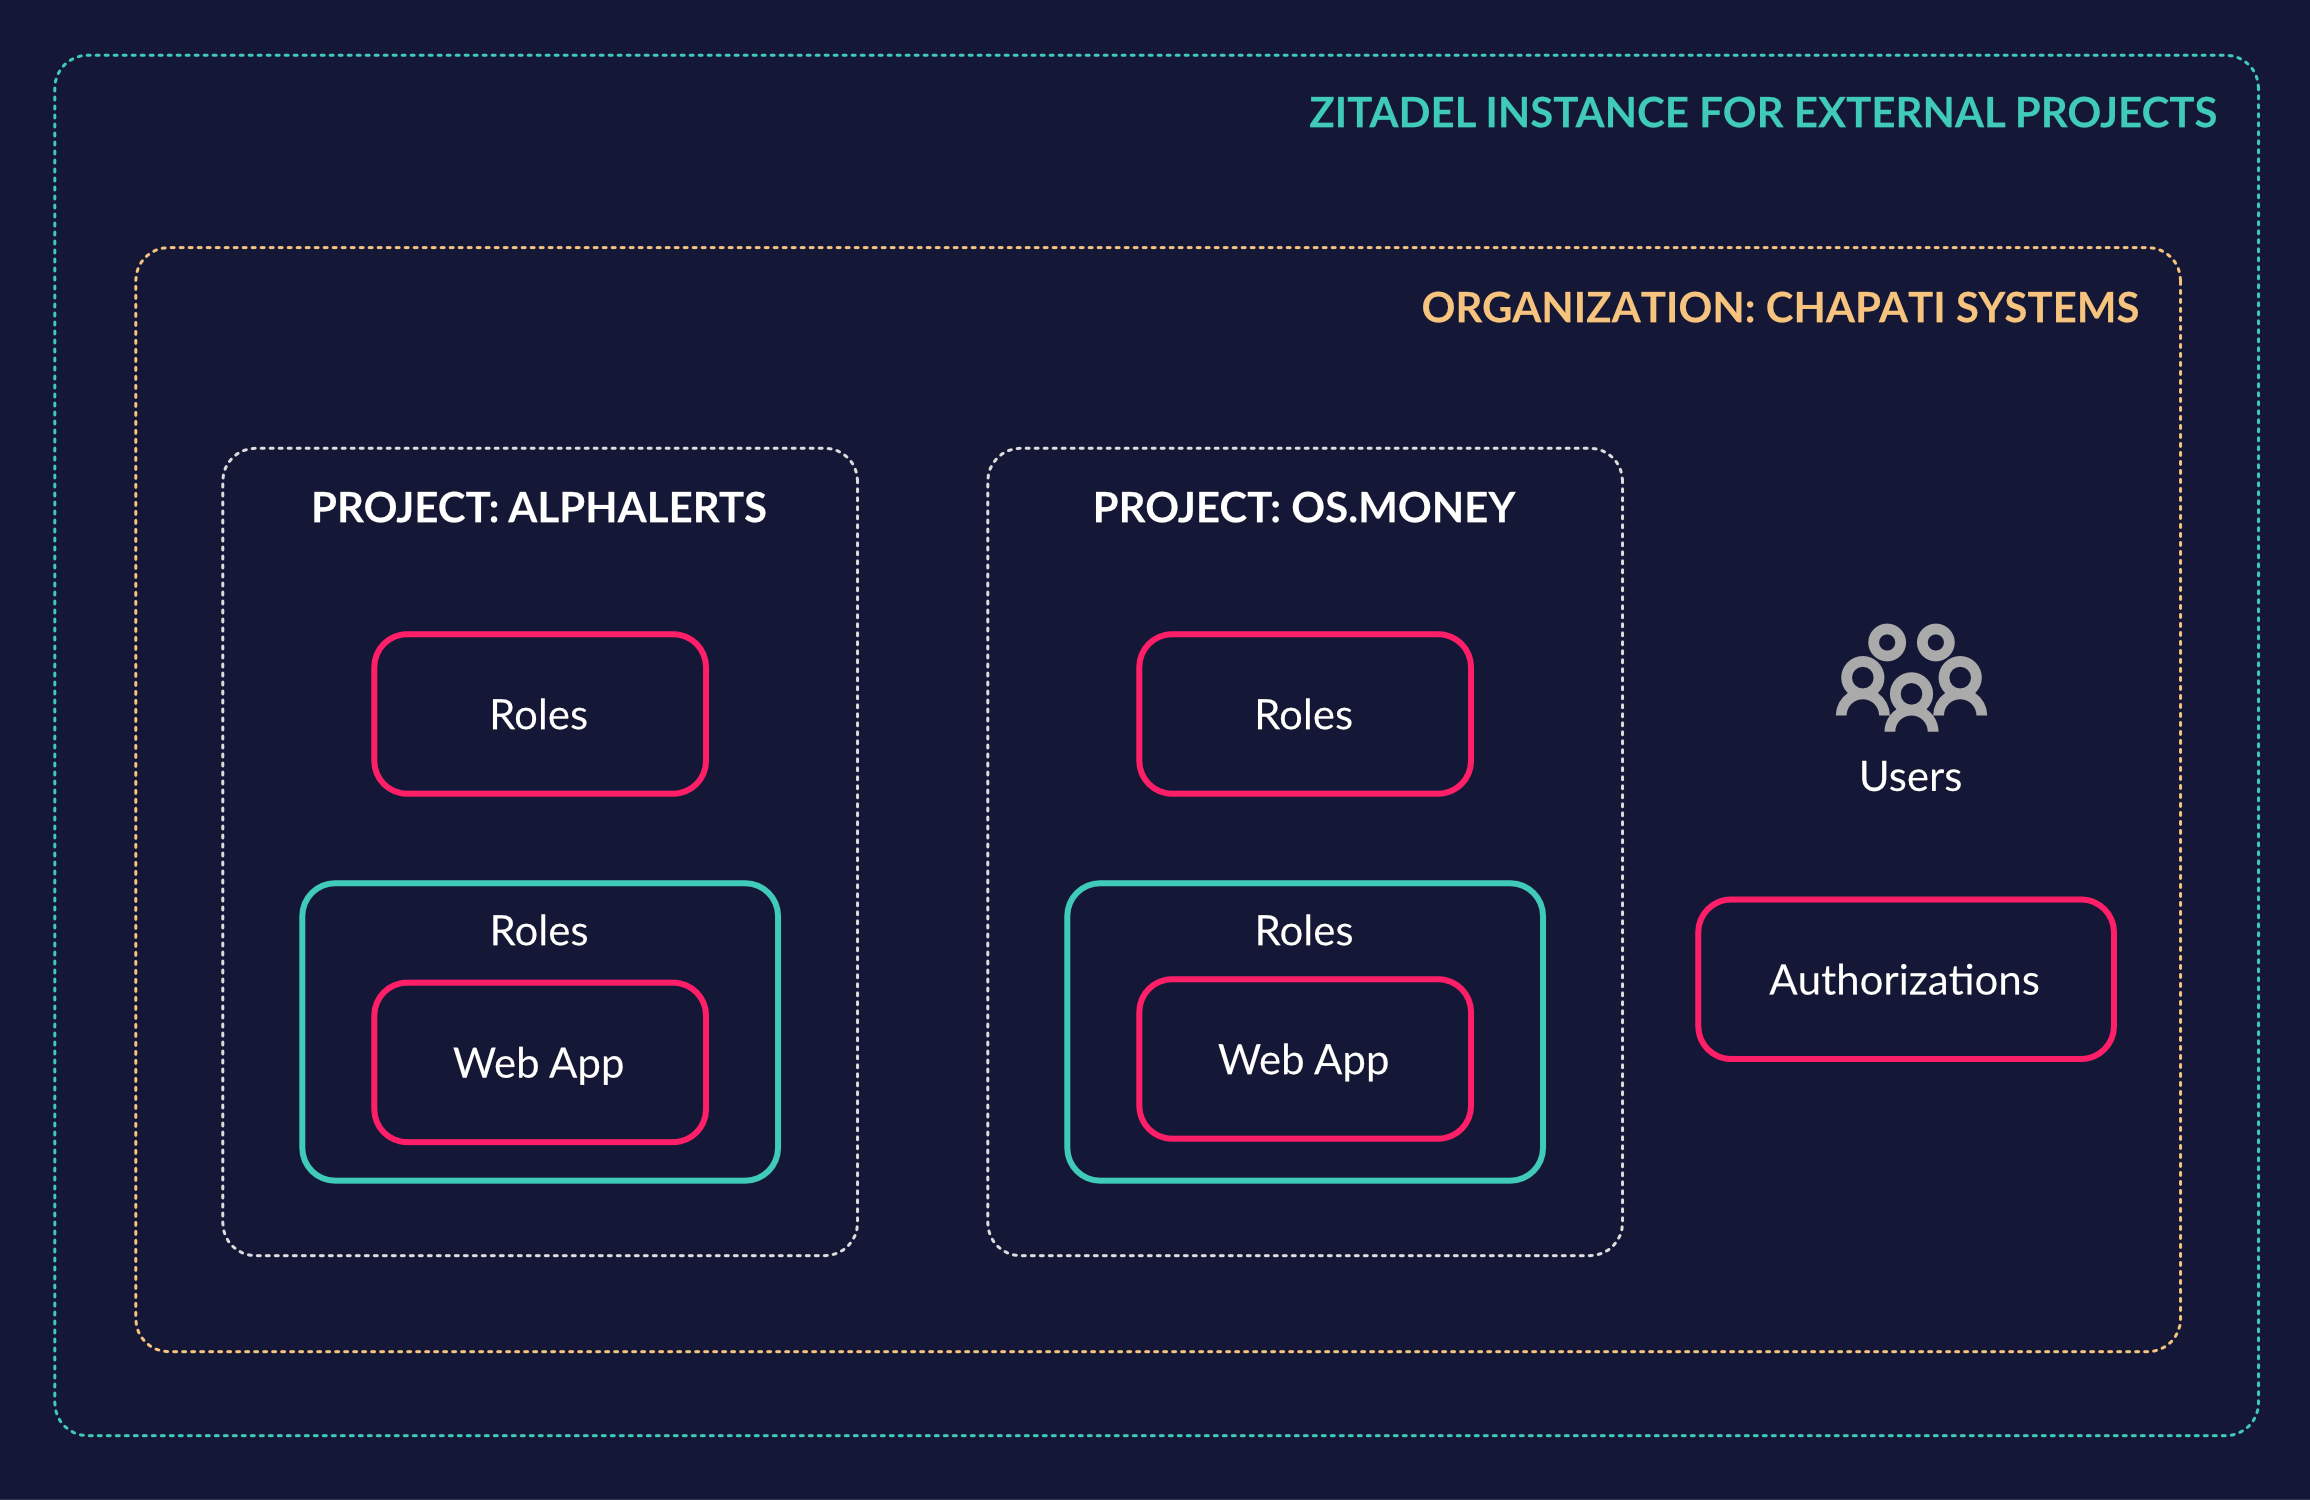 ZITADEL's Organization Structure Allowing for Sharing of Resources Between Projects